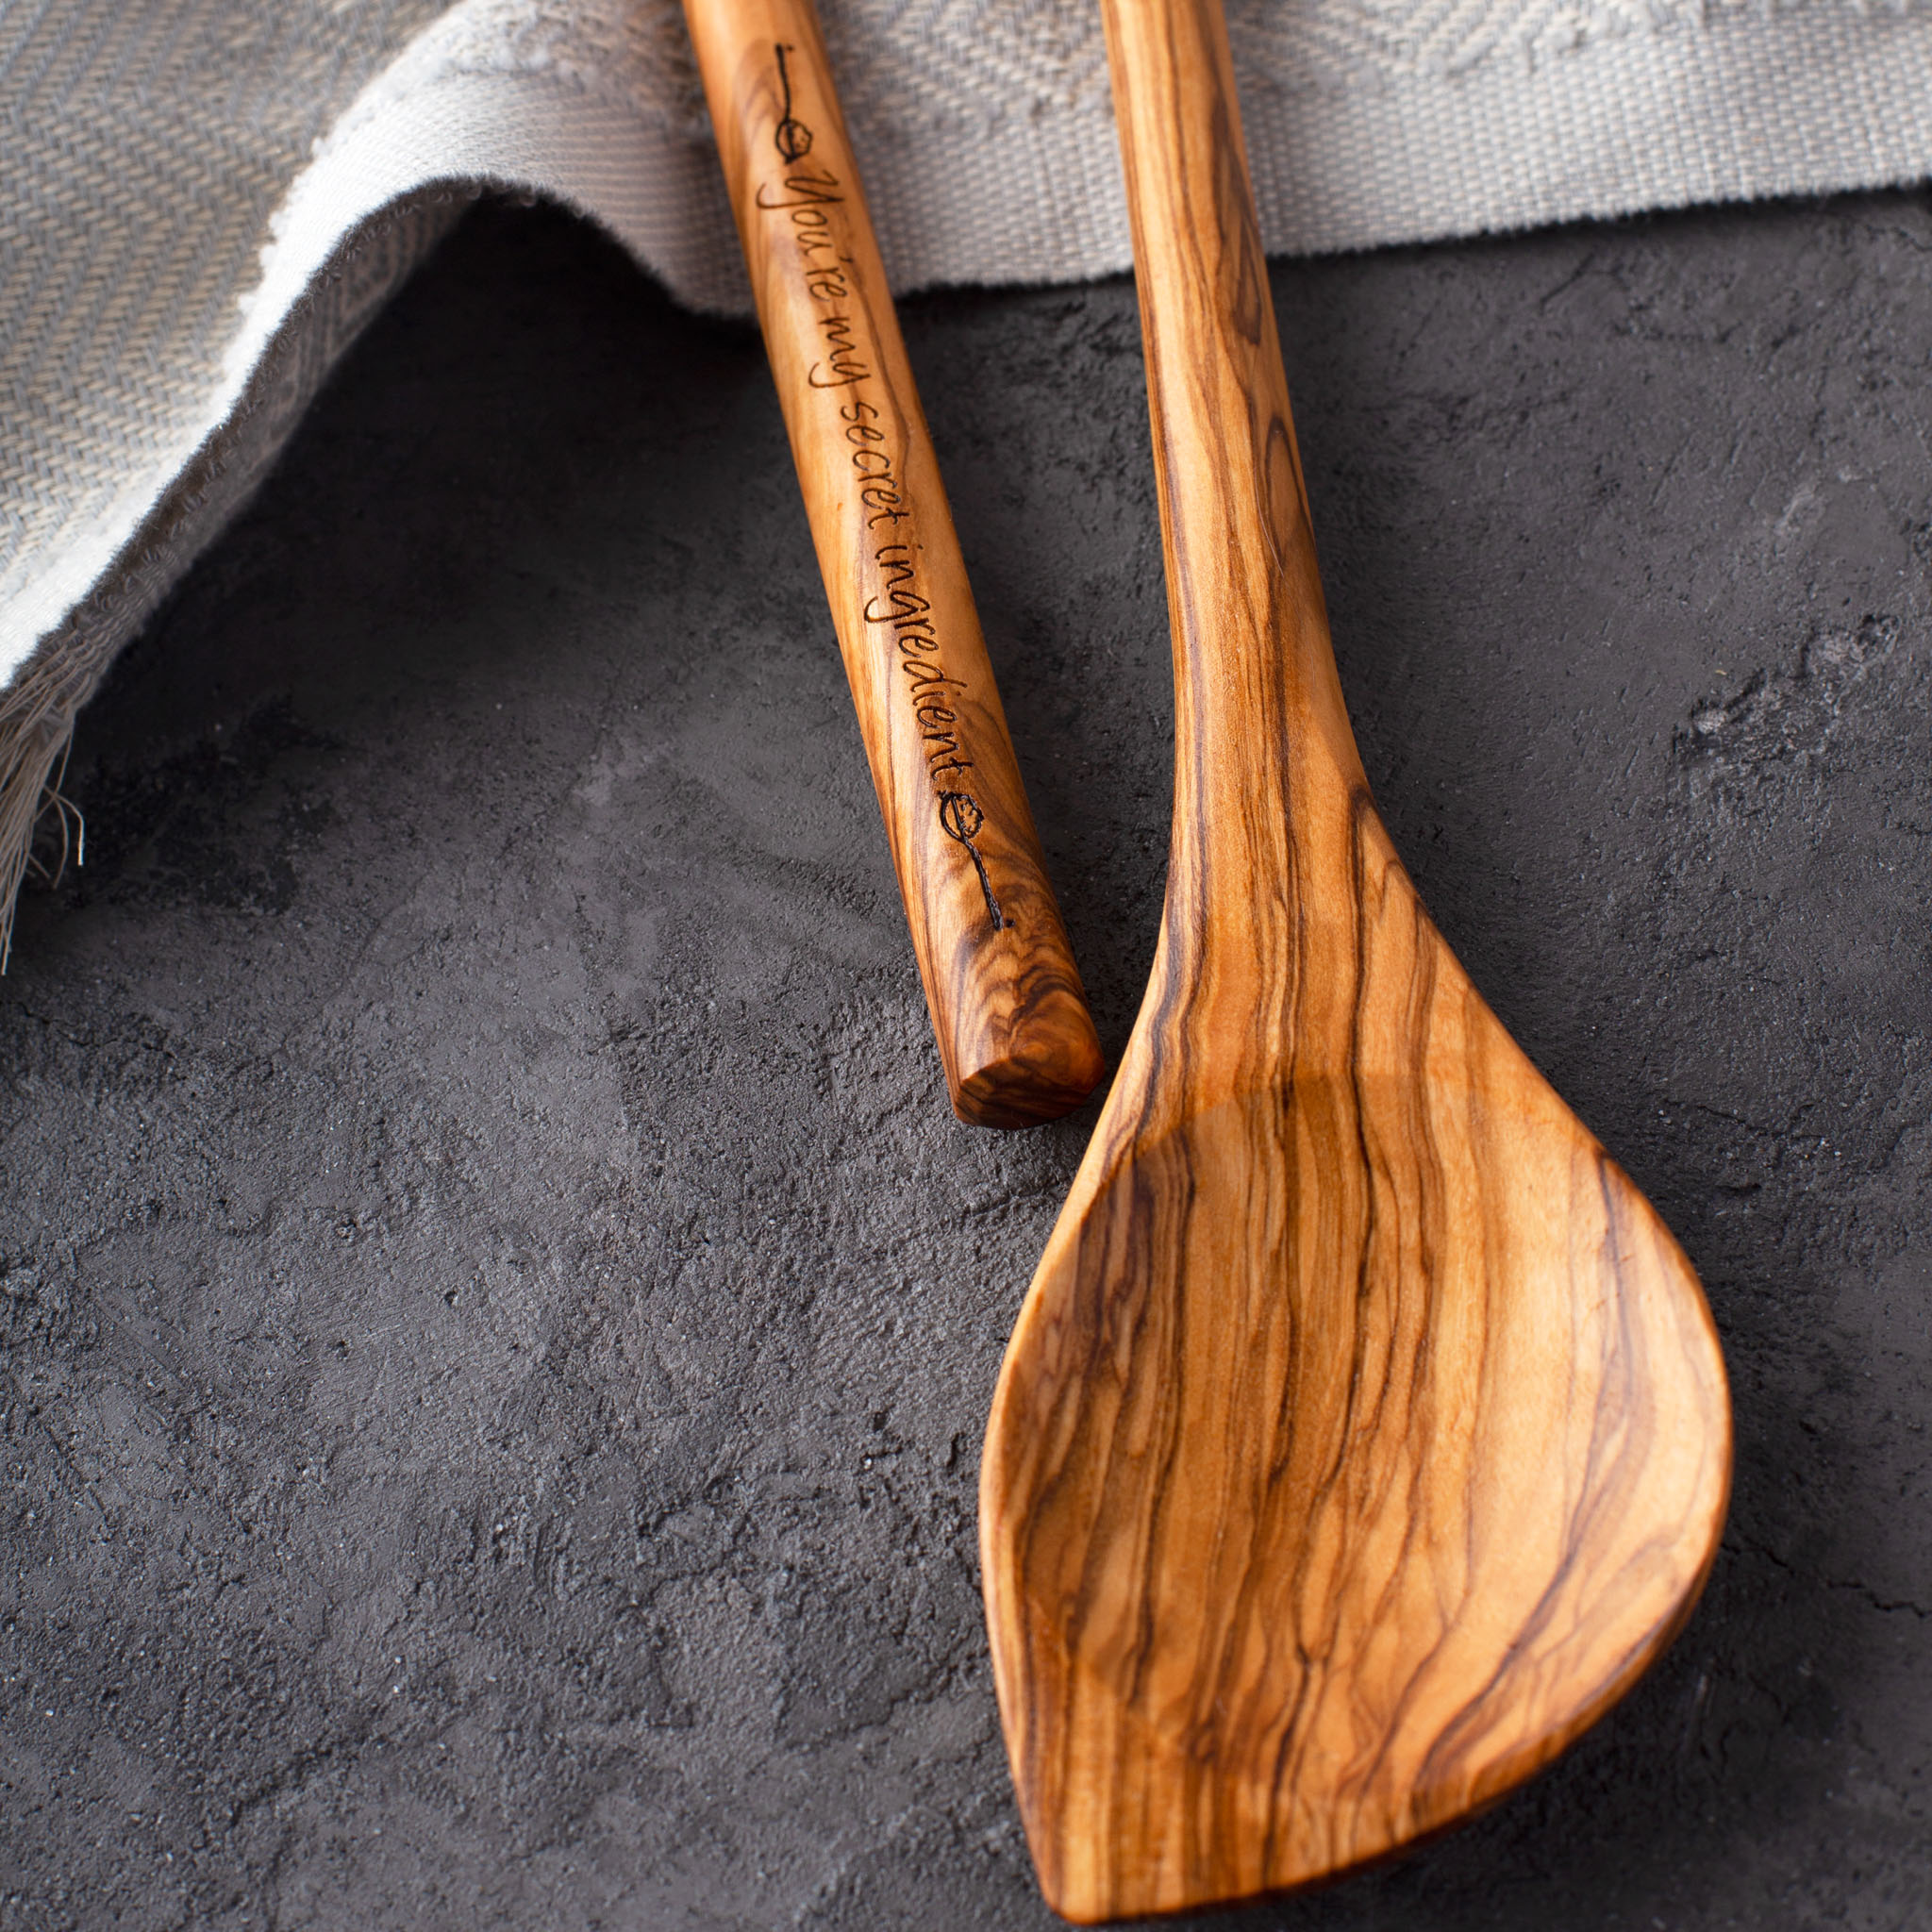 Wood Spoon and Wooden Spatula Set